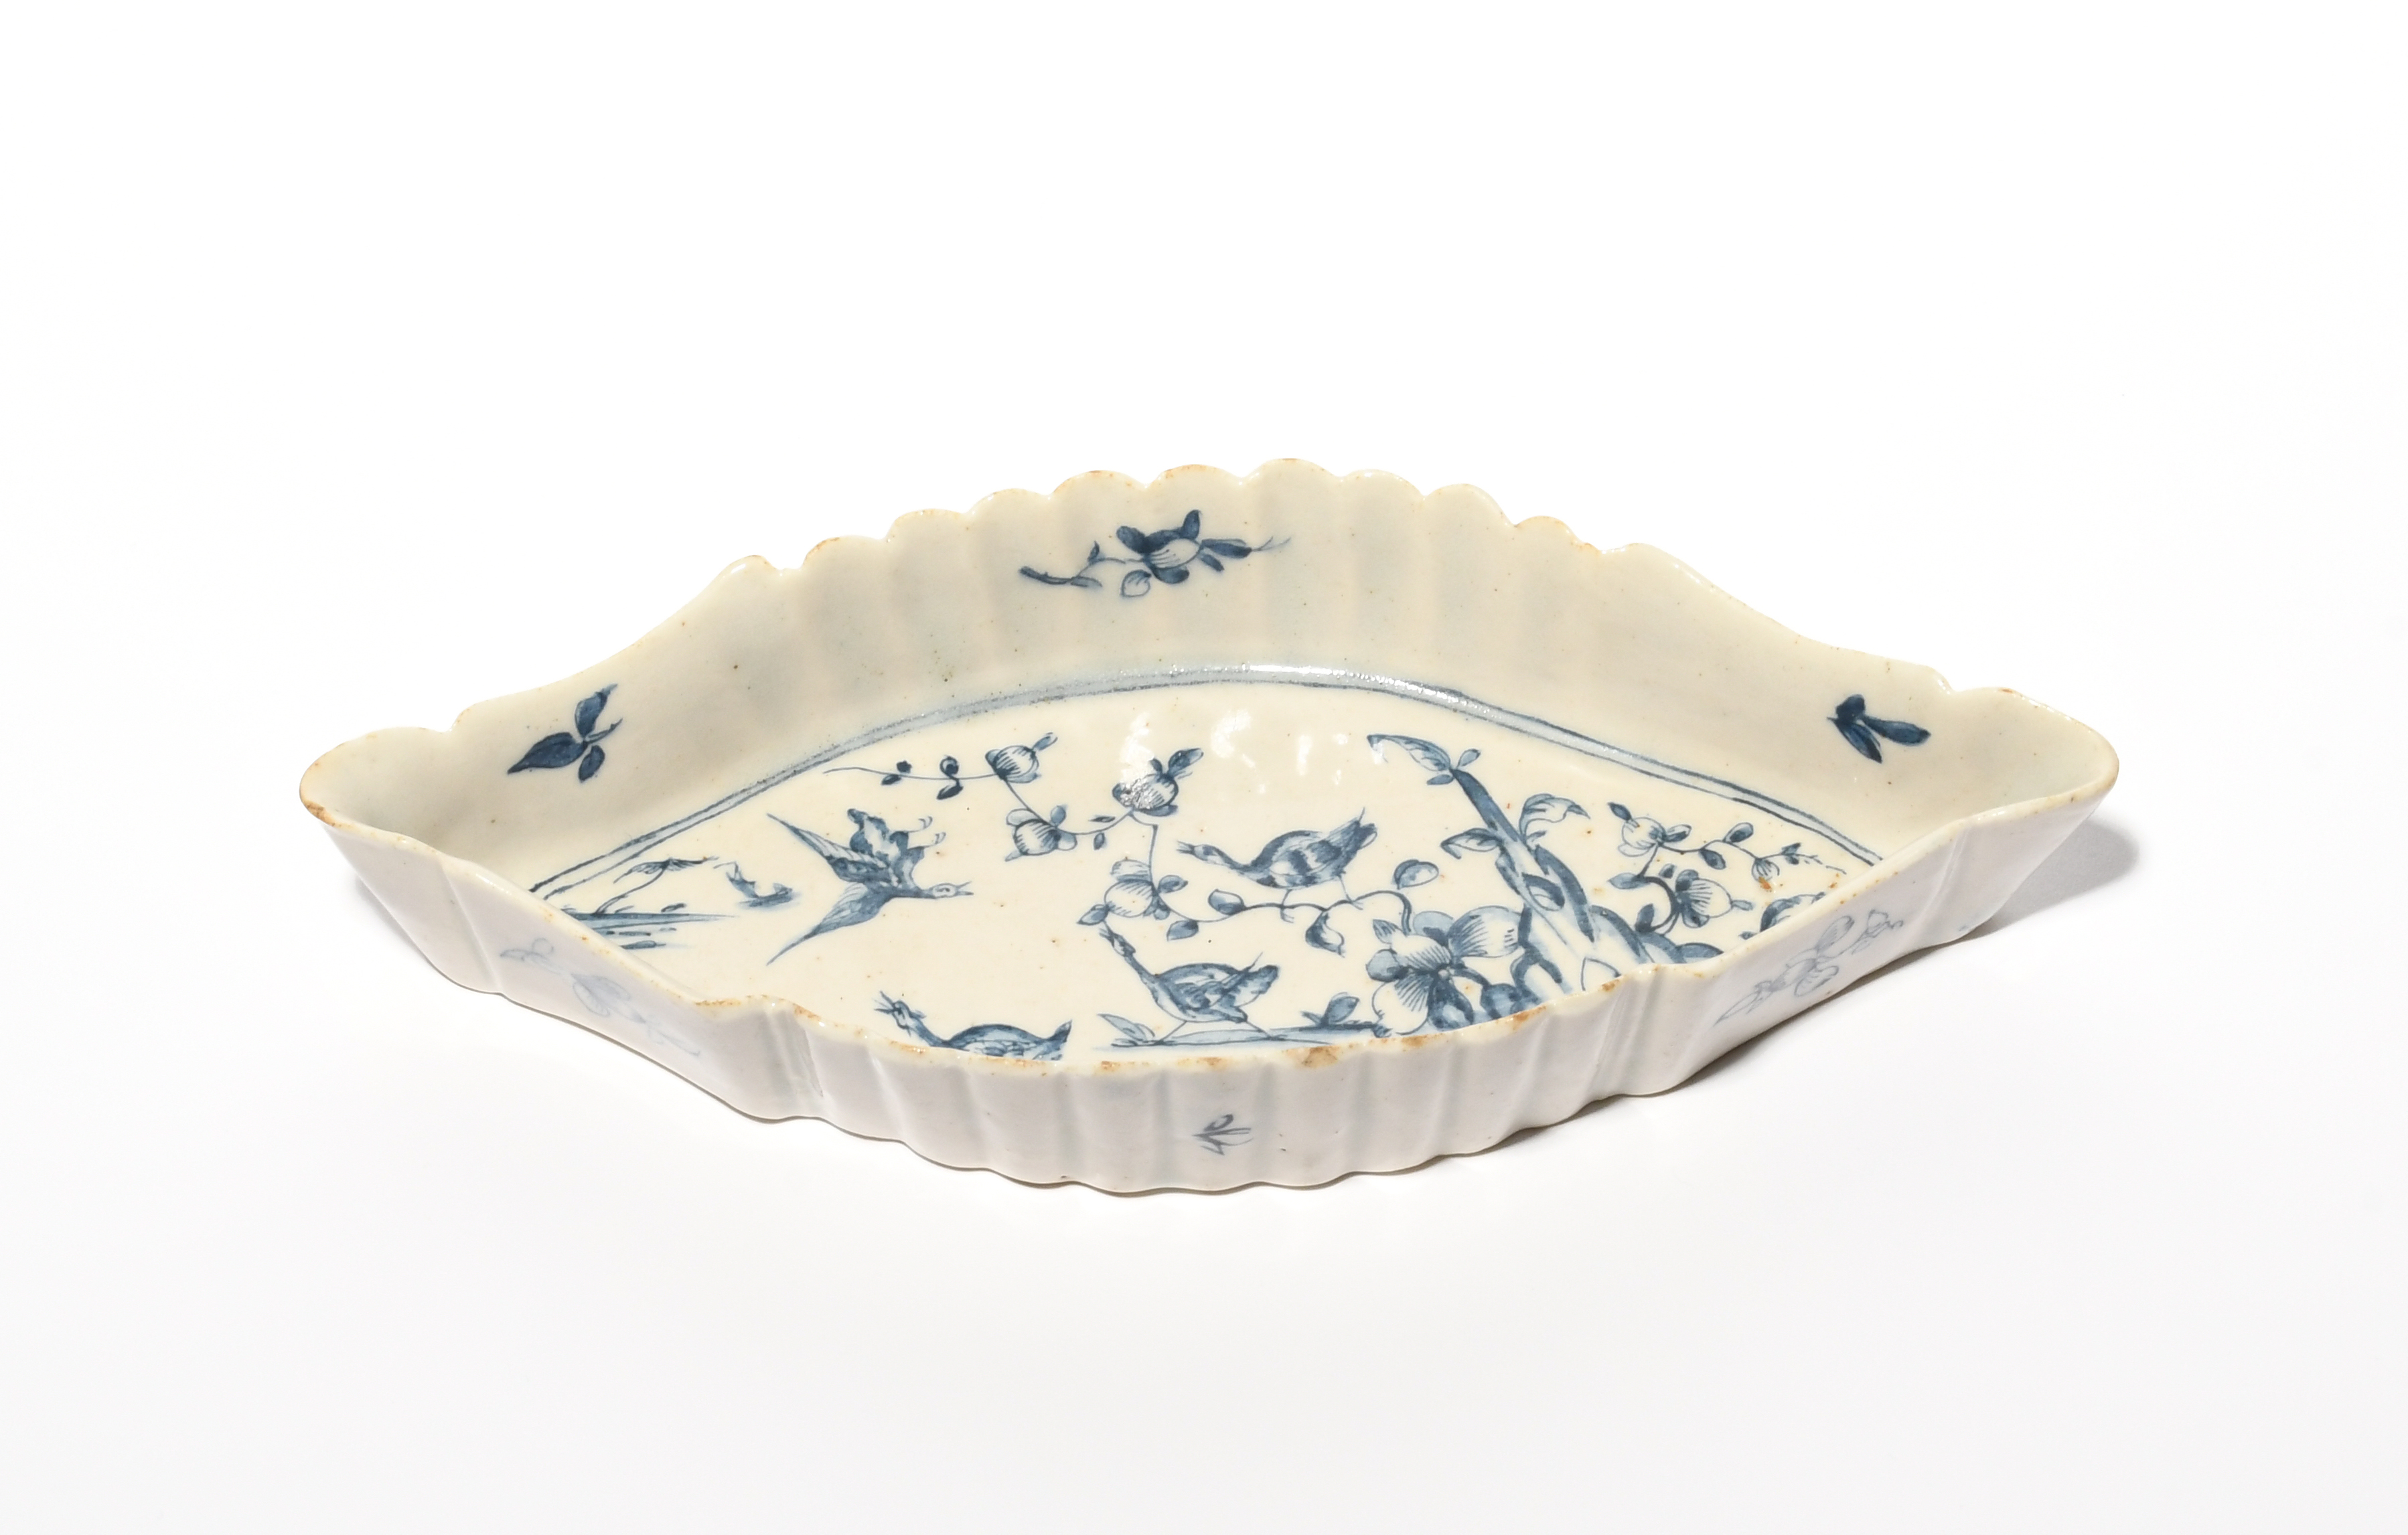 A rare and important blue and white Lowestoft spoon tray, c.1757-60, of a deep elongated shape - Image 4 of 4